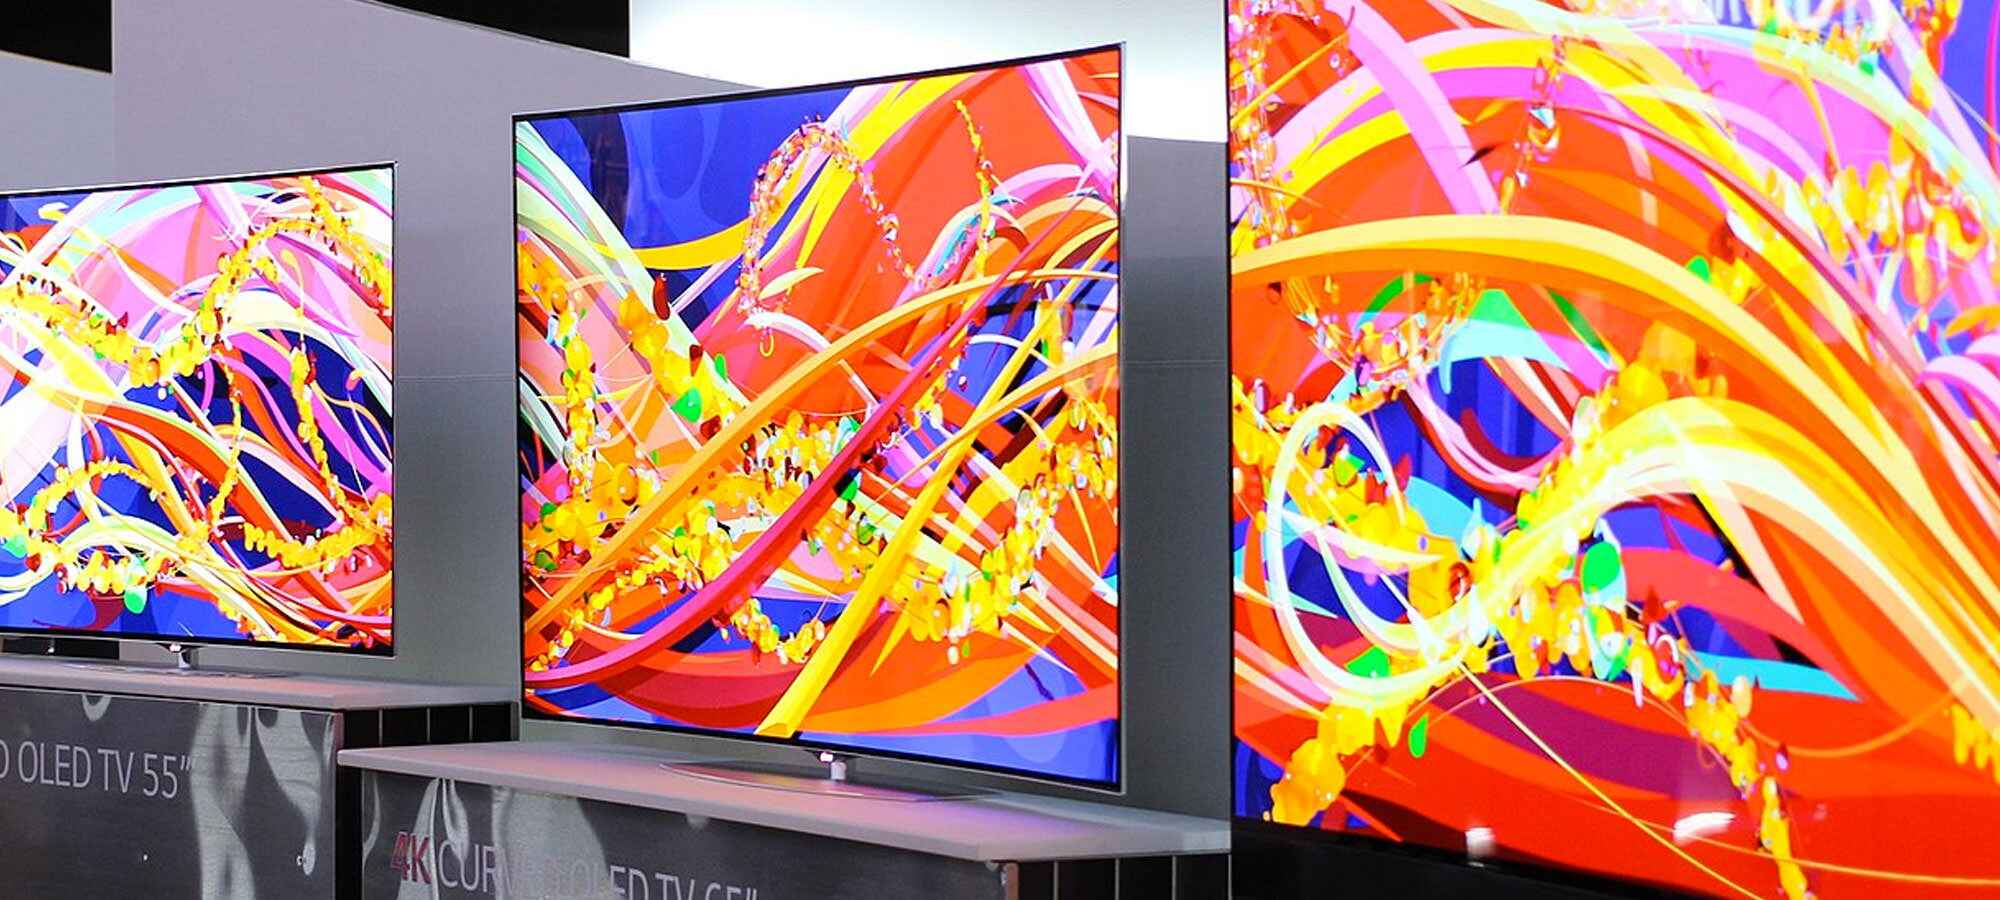 What Is The Advantage Of OLED TV